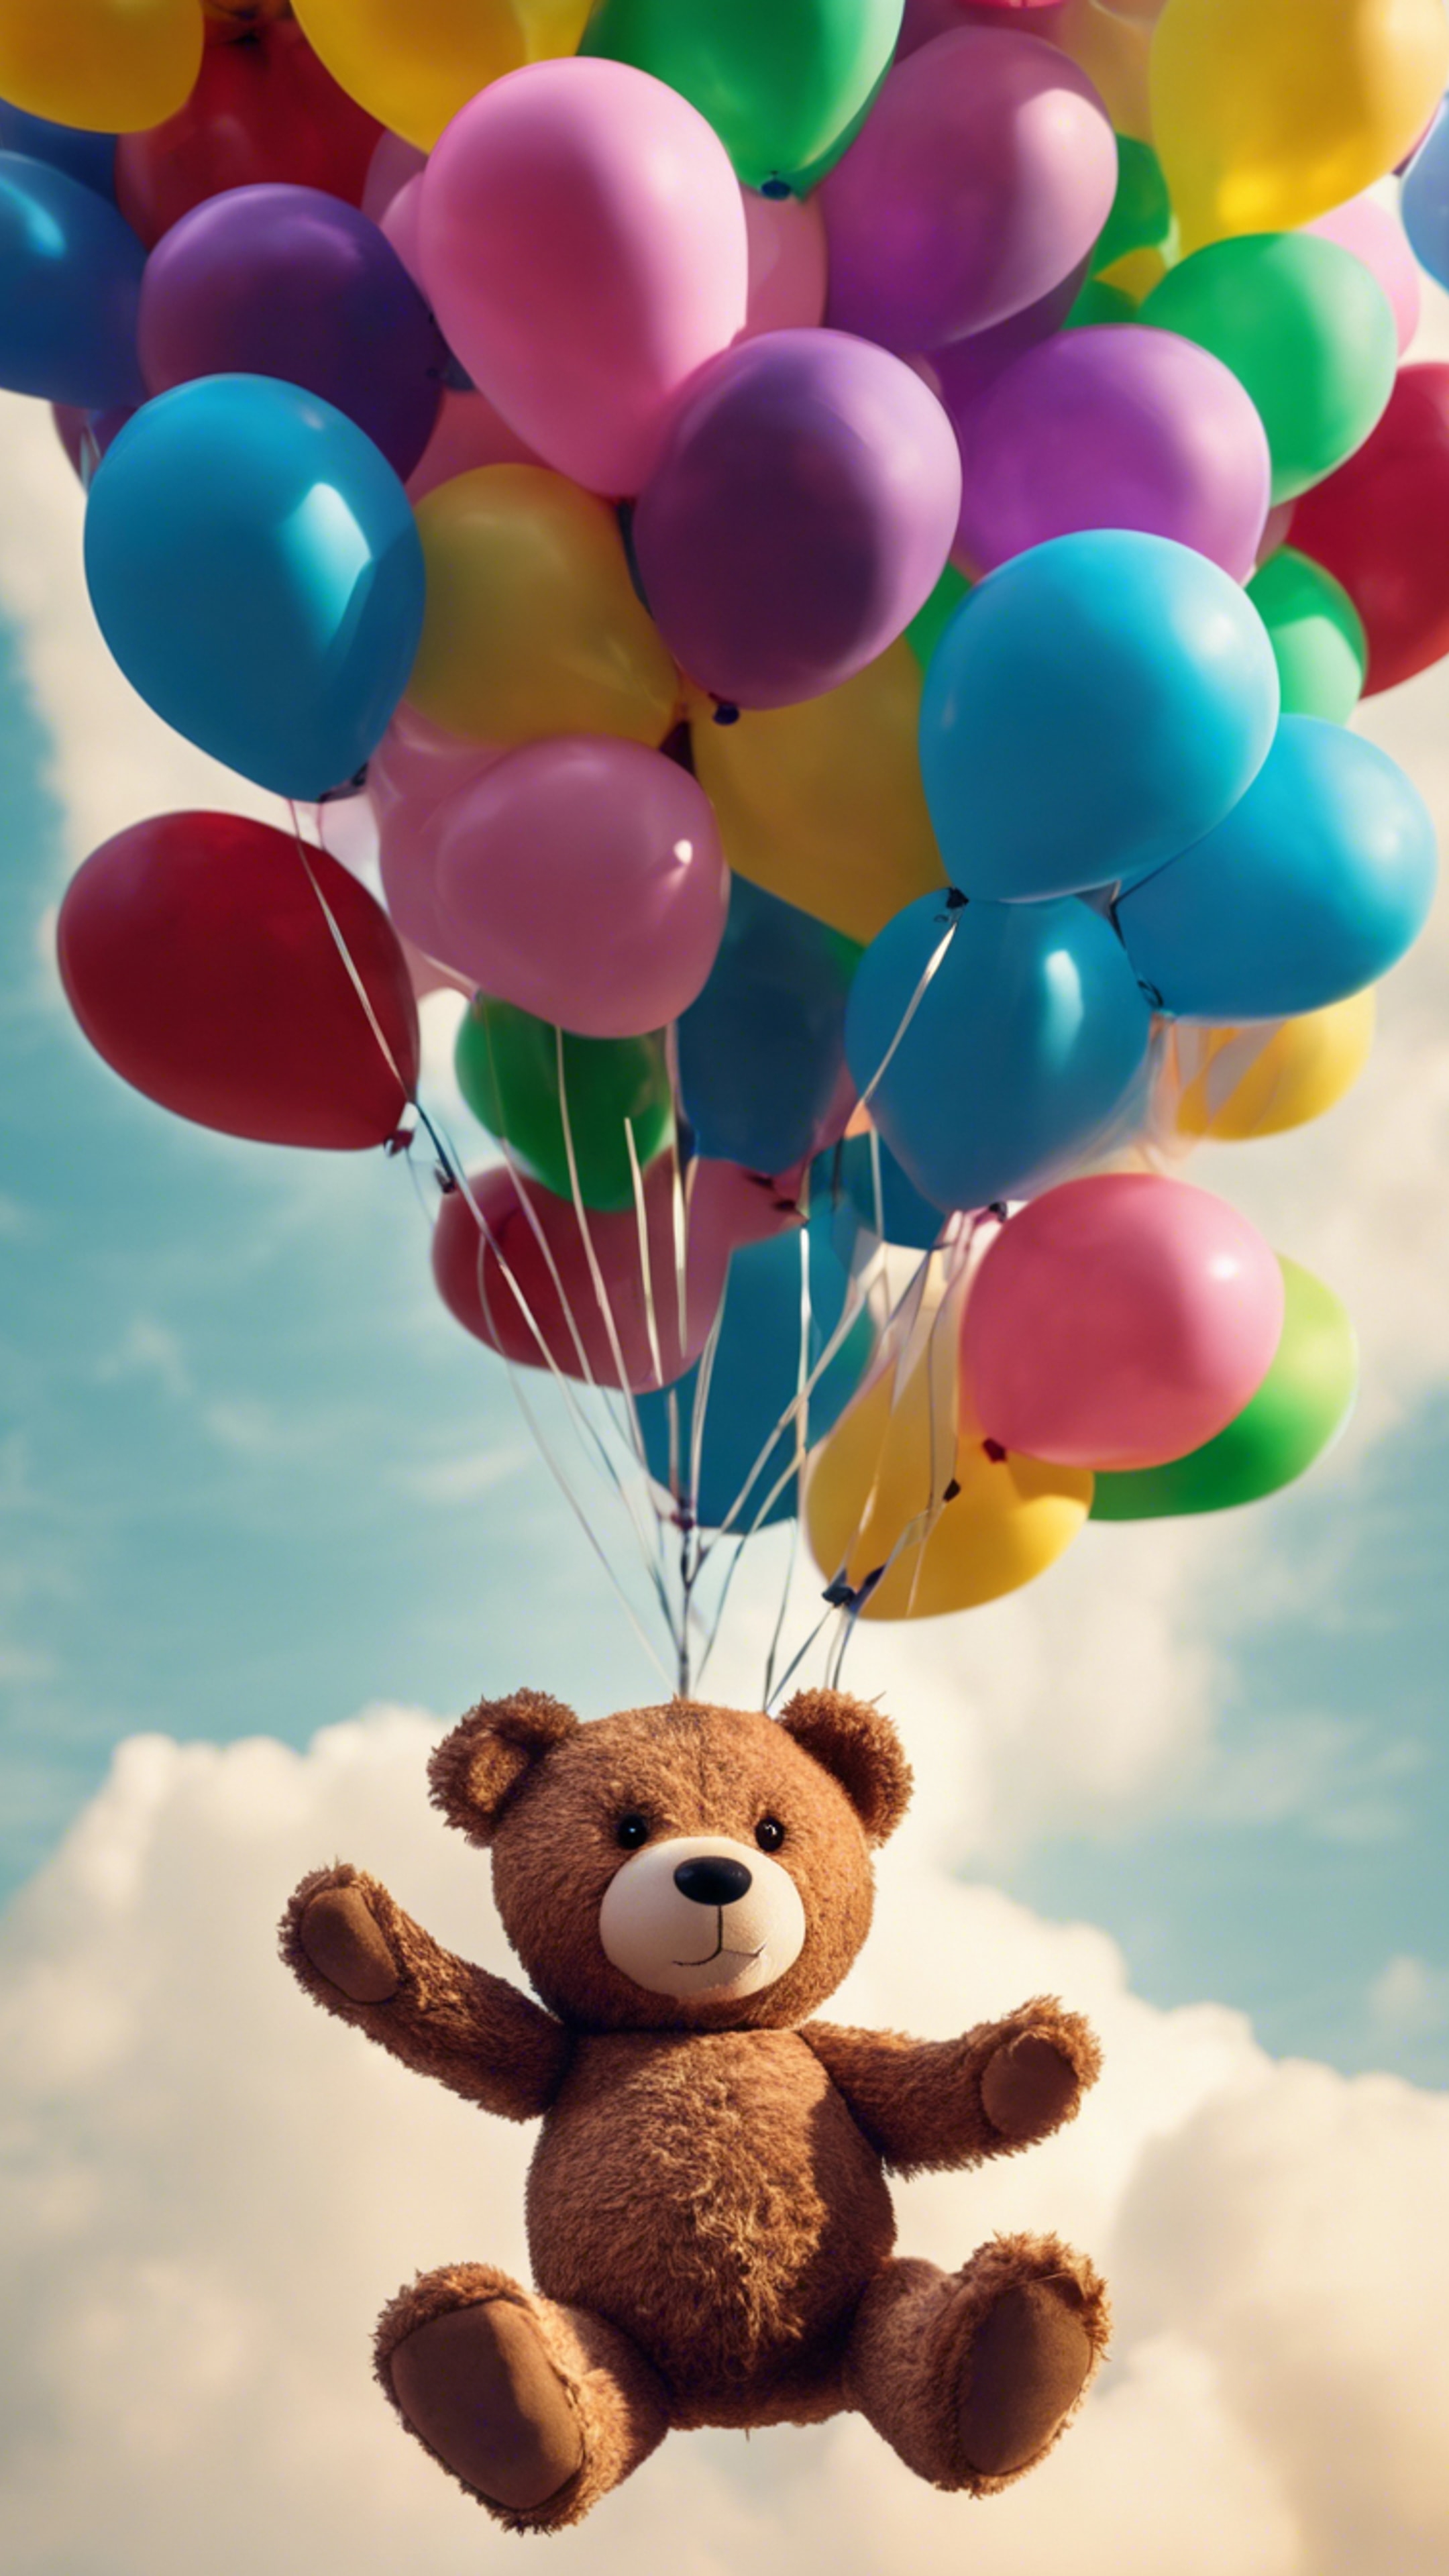 A teddy bear floating in the sky suspended to a set of colorful helium balloons. Papel de parede[3cd150b054934ab09e64]